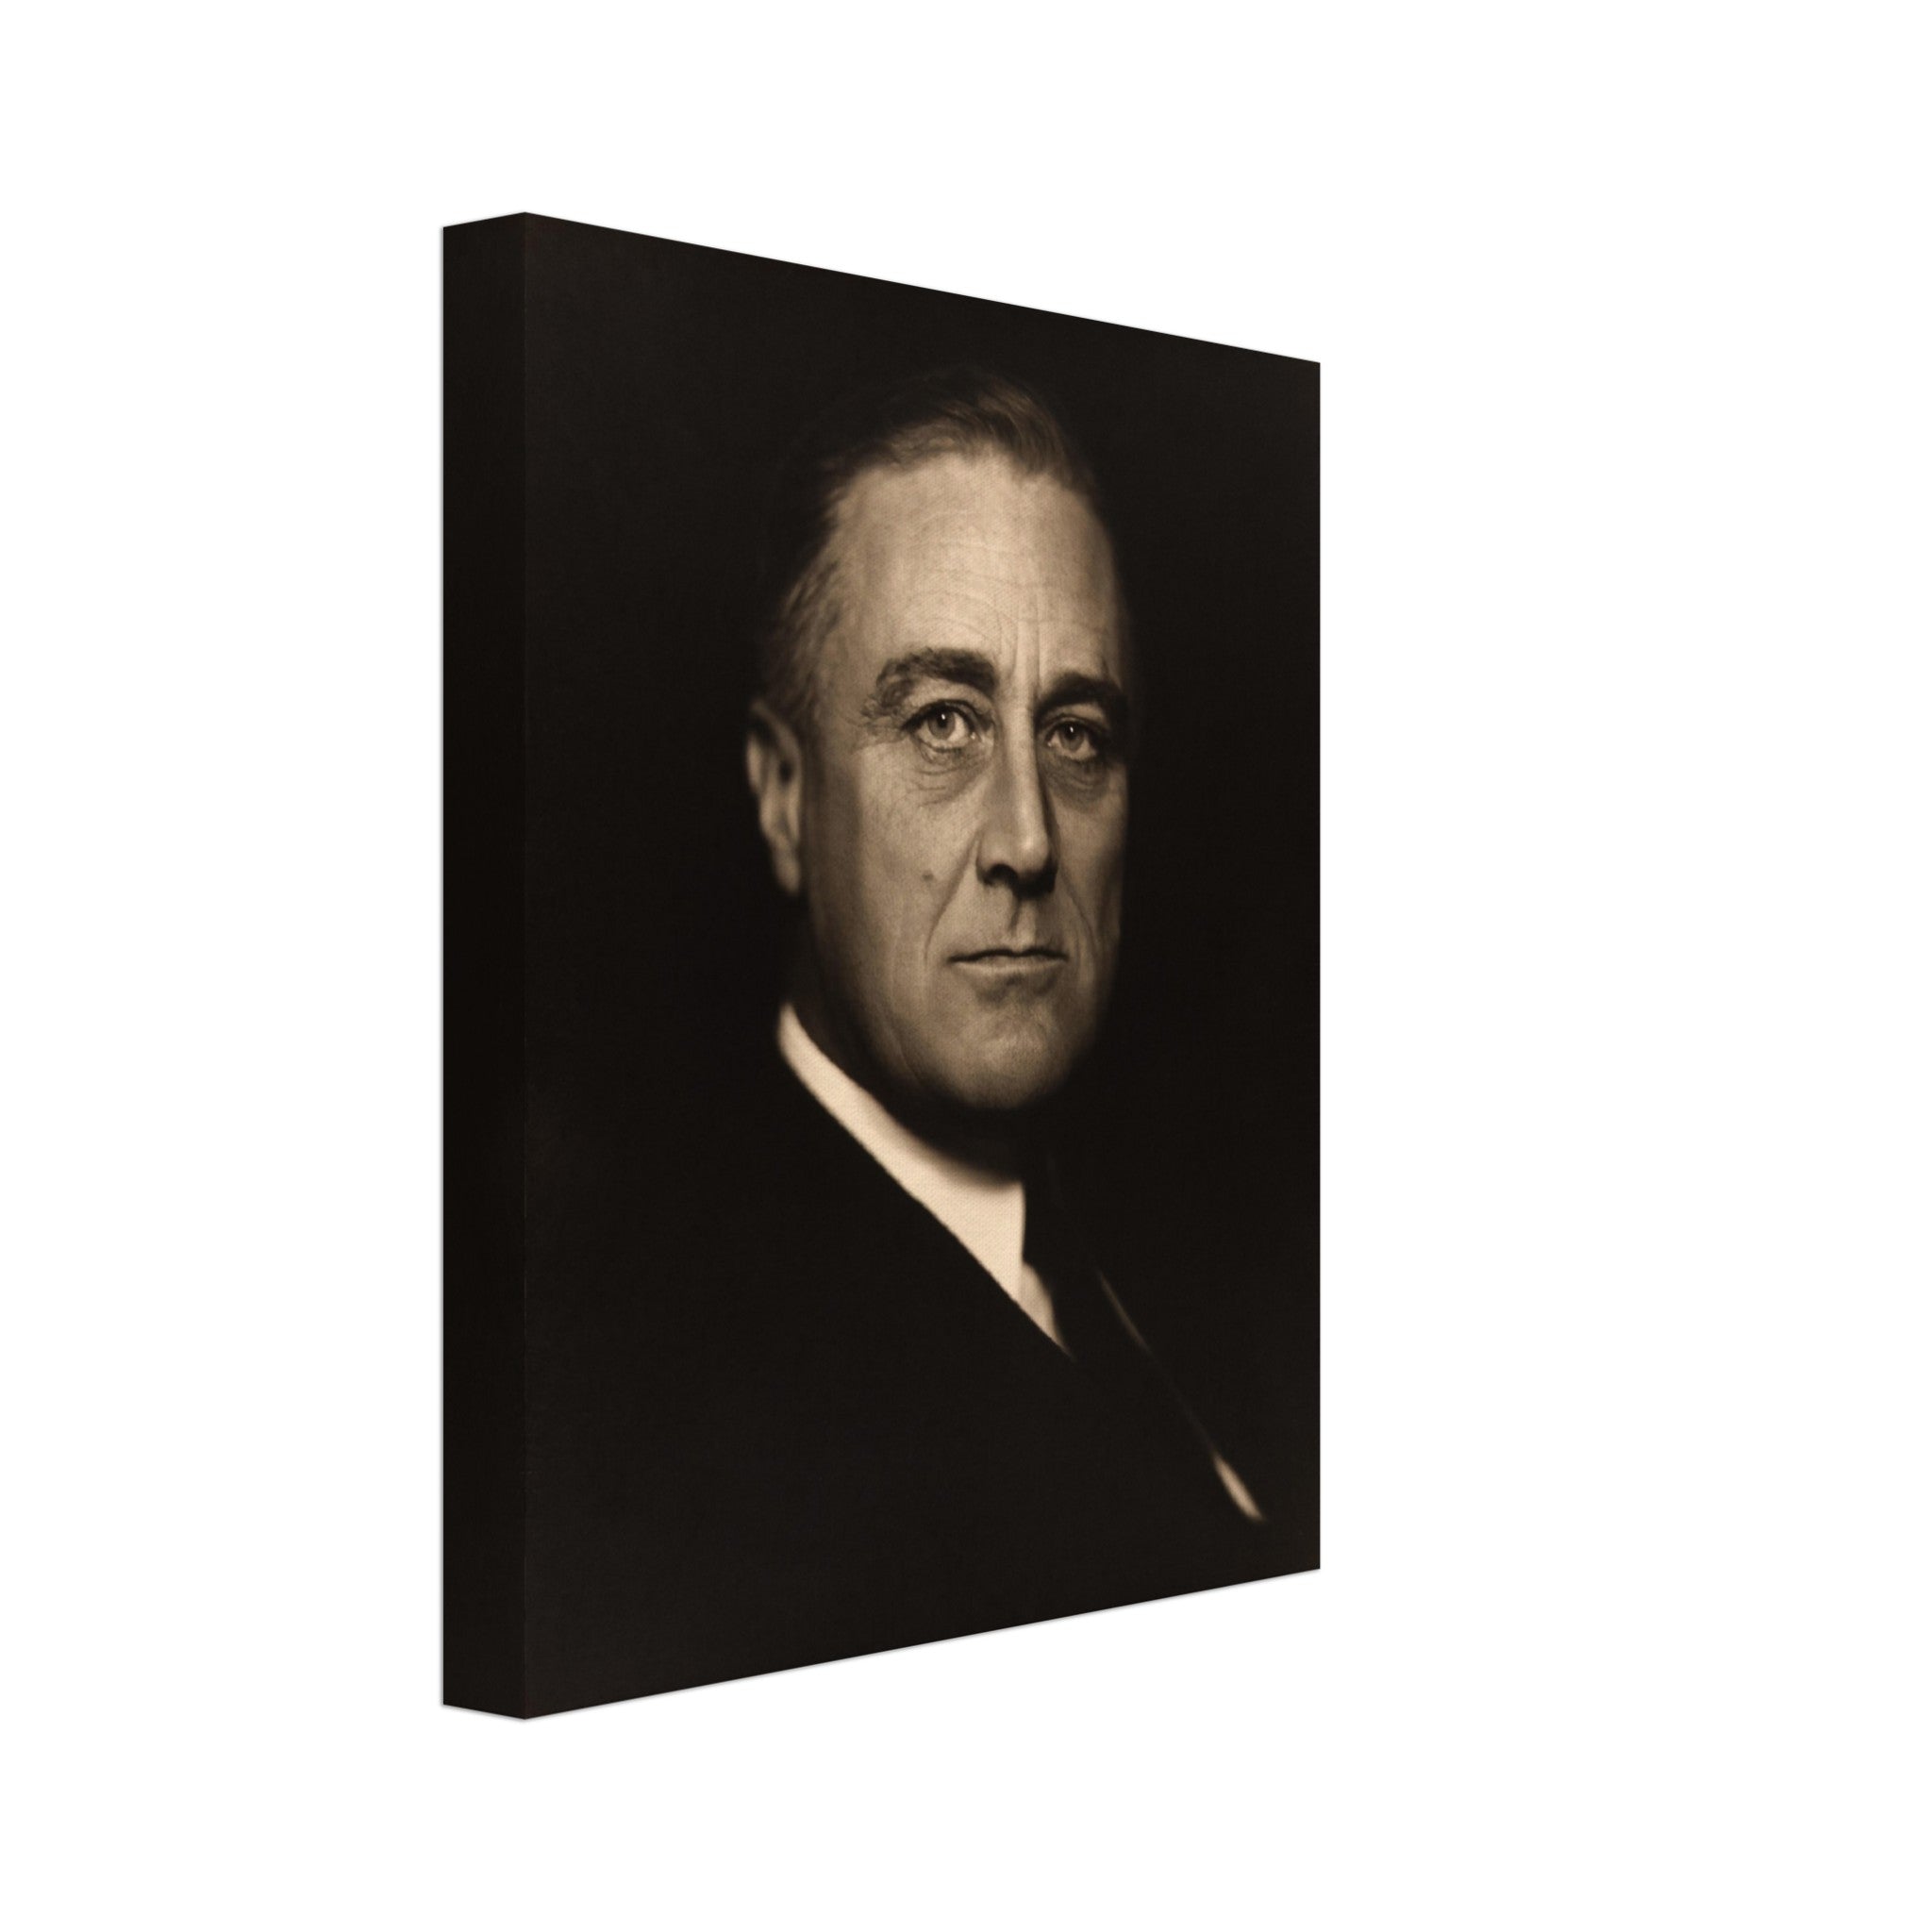 Fdr Canvas, Greatest American President Of The 20th Century, Vintage Photo - Iconic Fdr Canvas Print - 32nd Potus - WallArtPrints4U